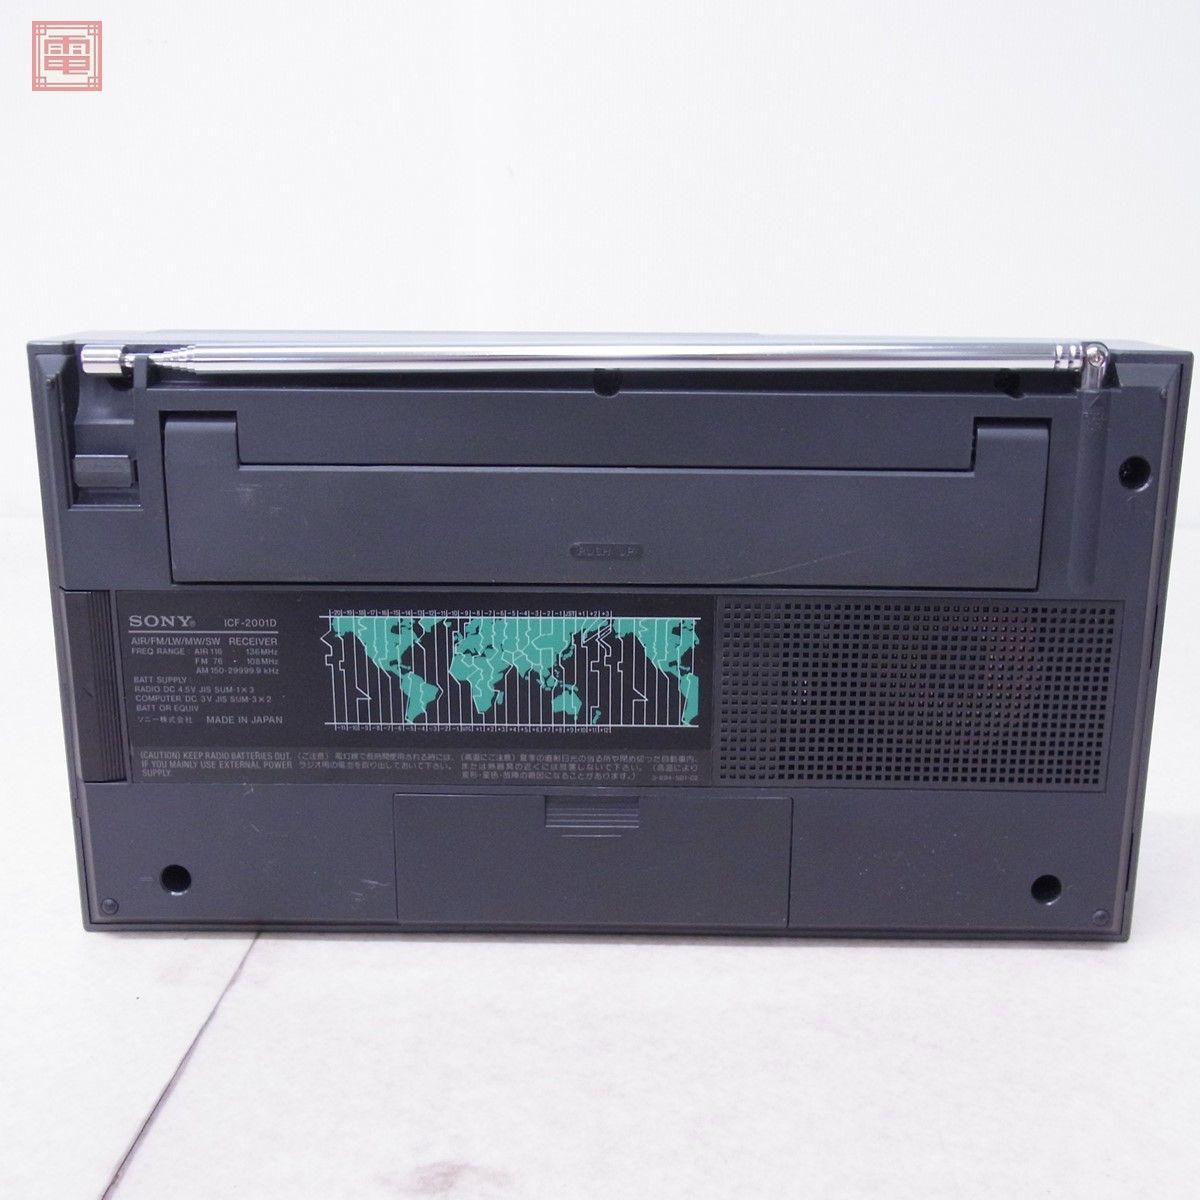 SONY ソニー ICF-2001D AM/FM/SW PLLシンセサイザーレシーバー BCL 